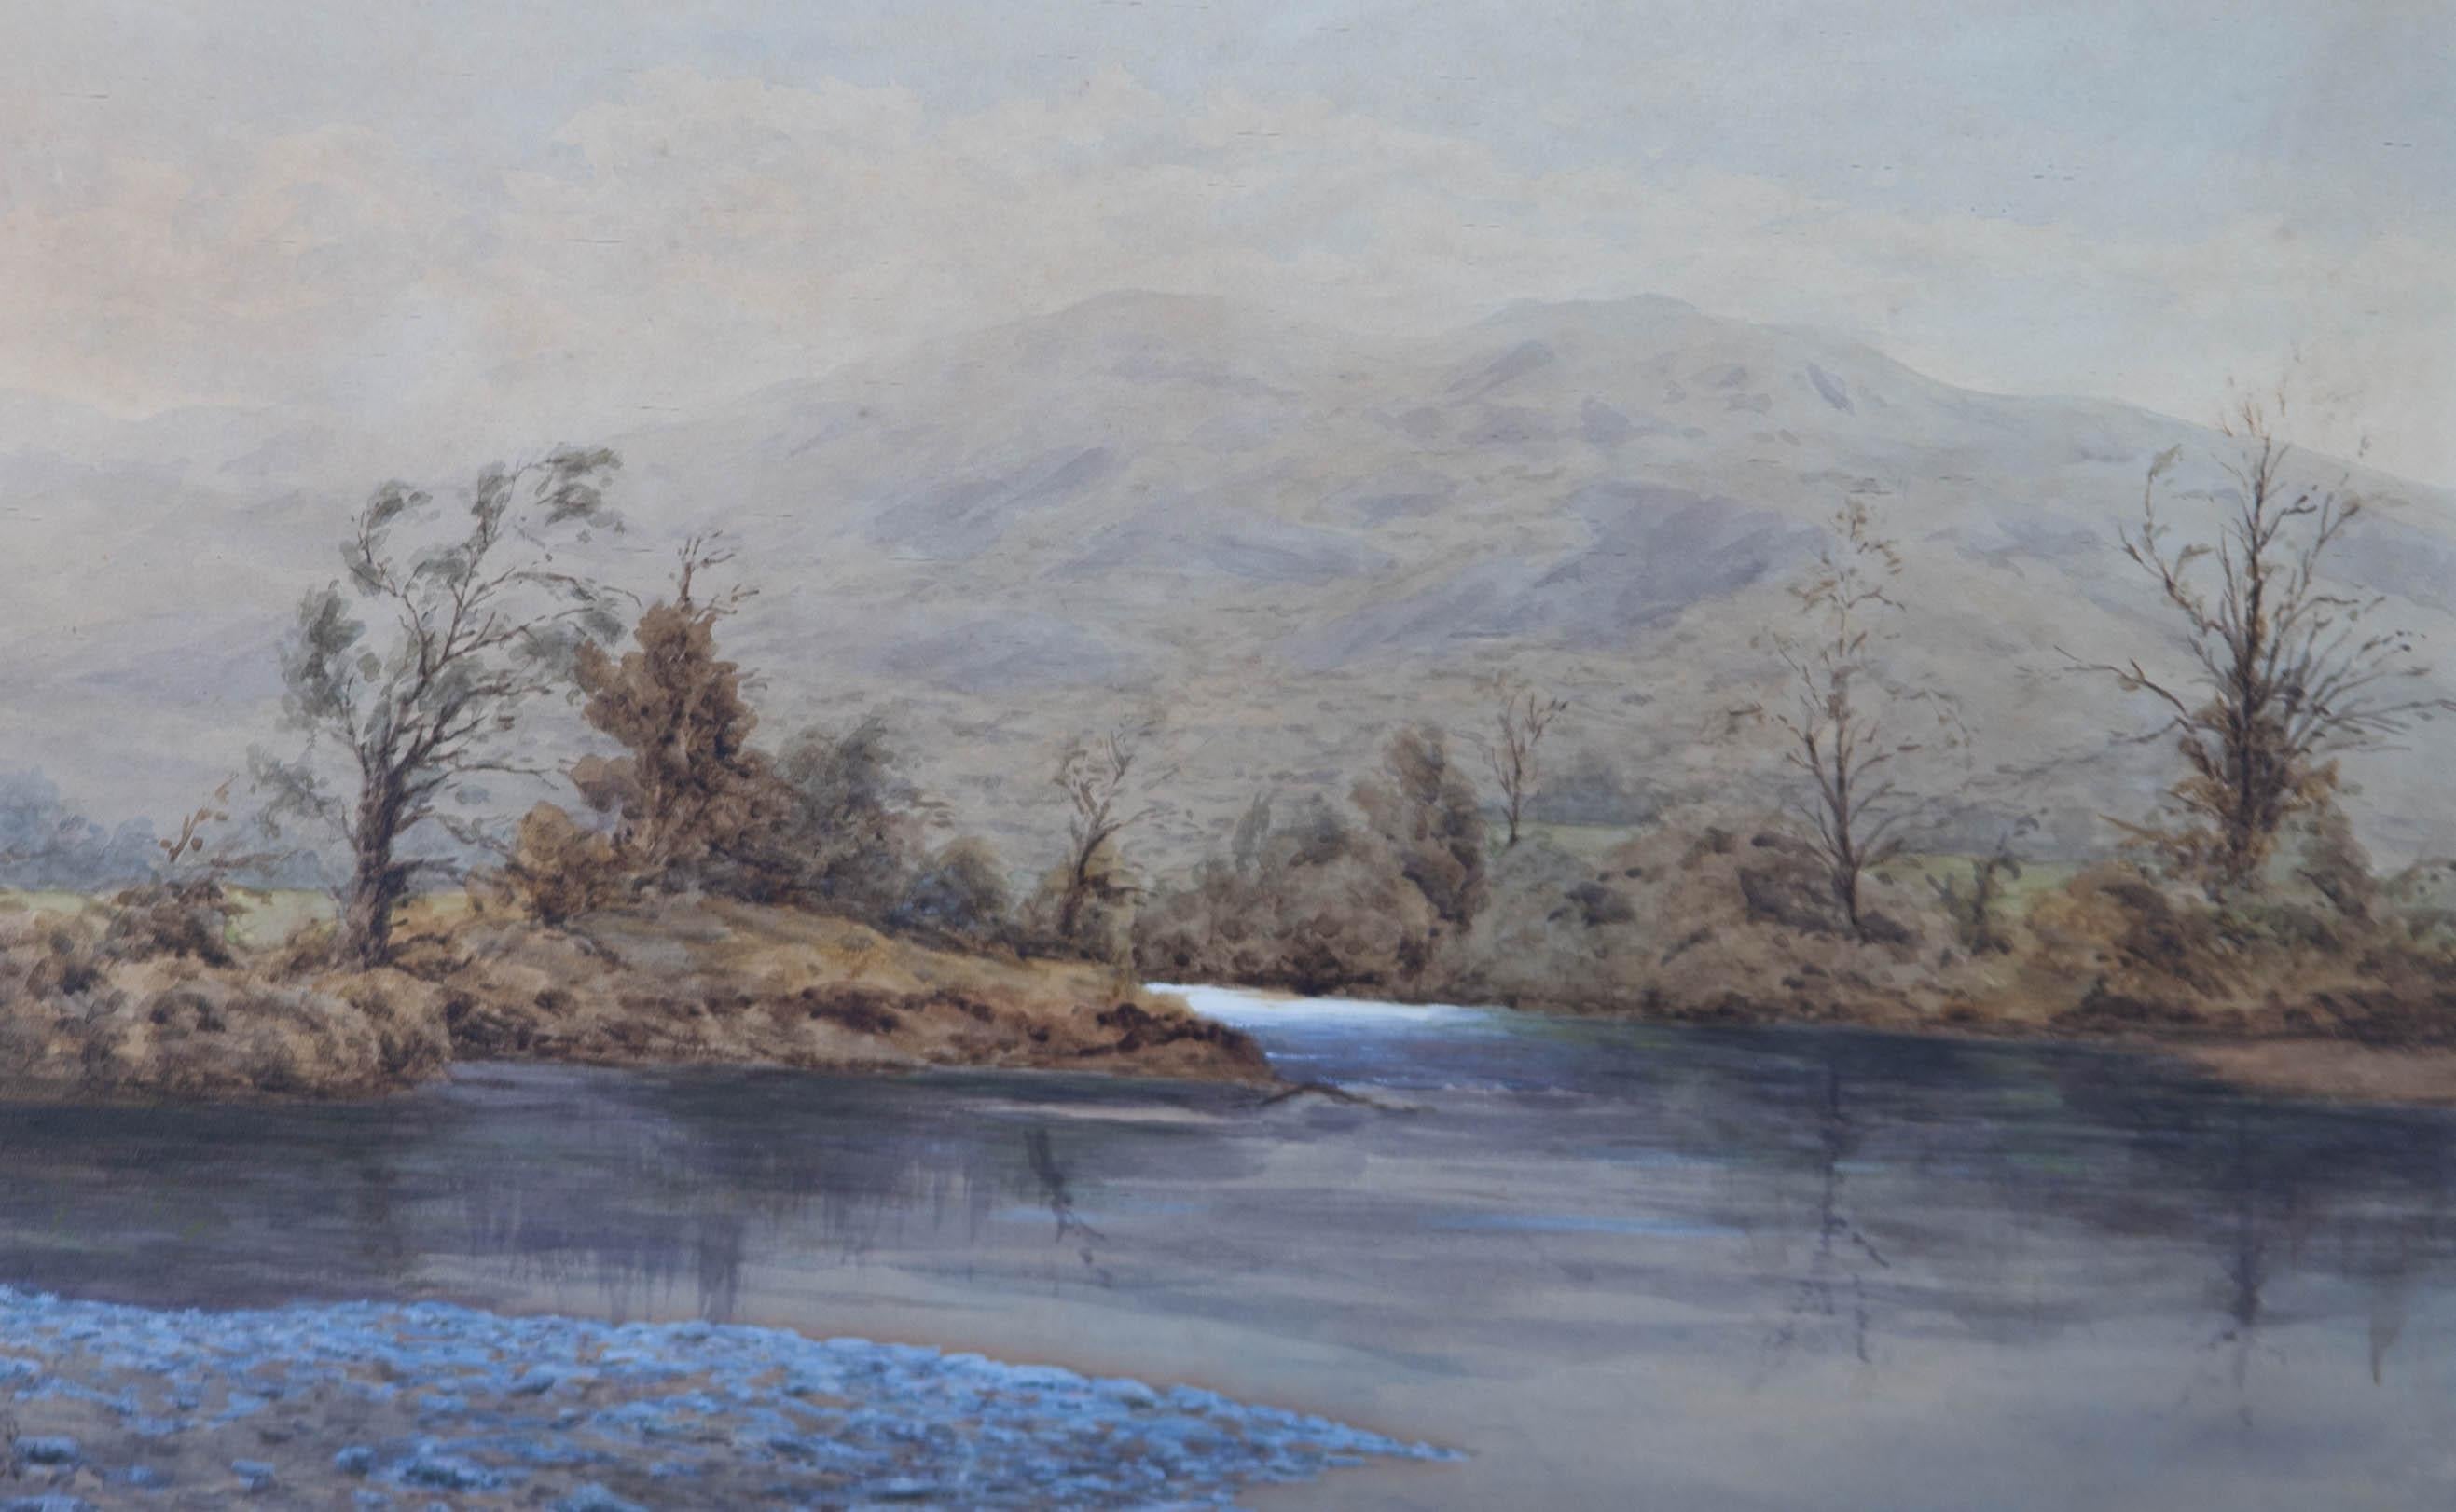 A landscape scene at the River Derwent in the valley of Borrowdale, Cumberland (now Cumbria). The second of two paintings by the artist depicting this river. Presented glazed in a gold card mount and a wooden frame with burr yew wood veneer and